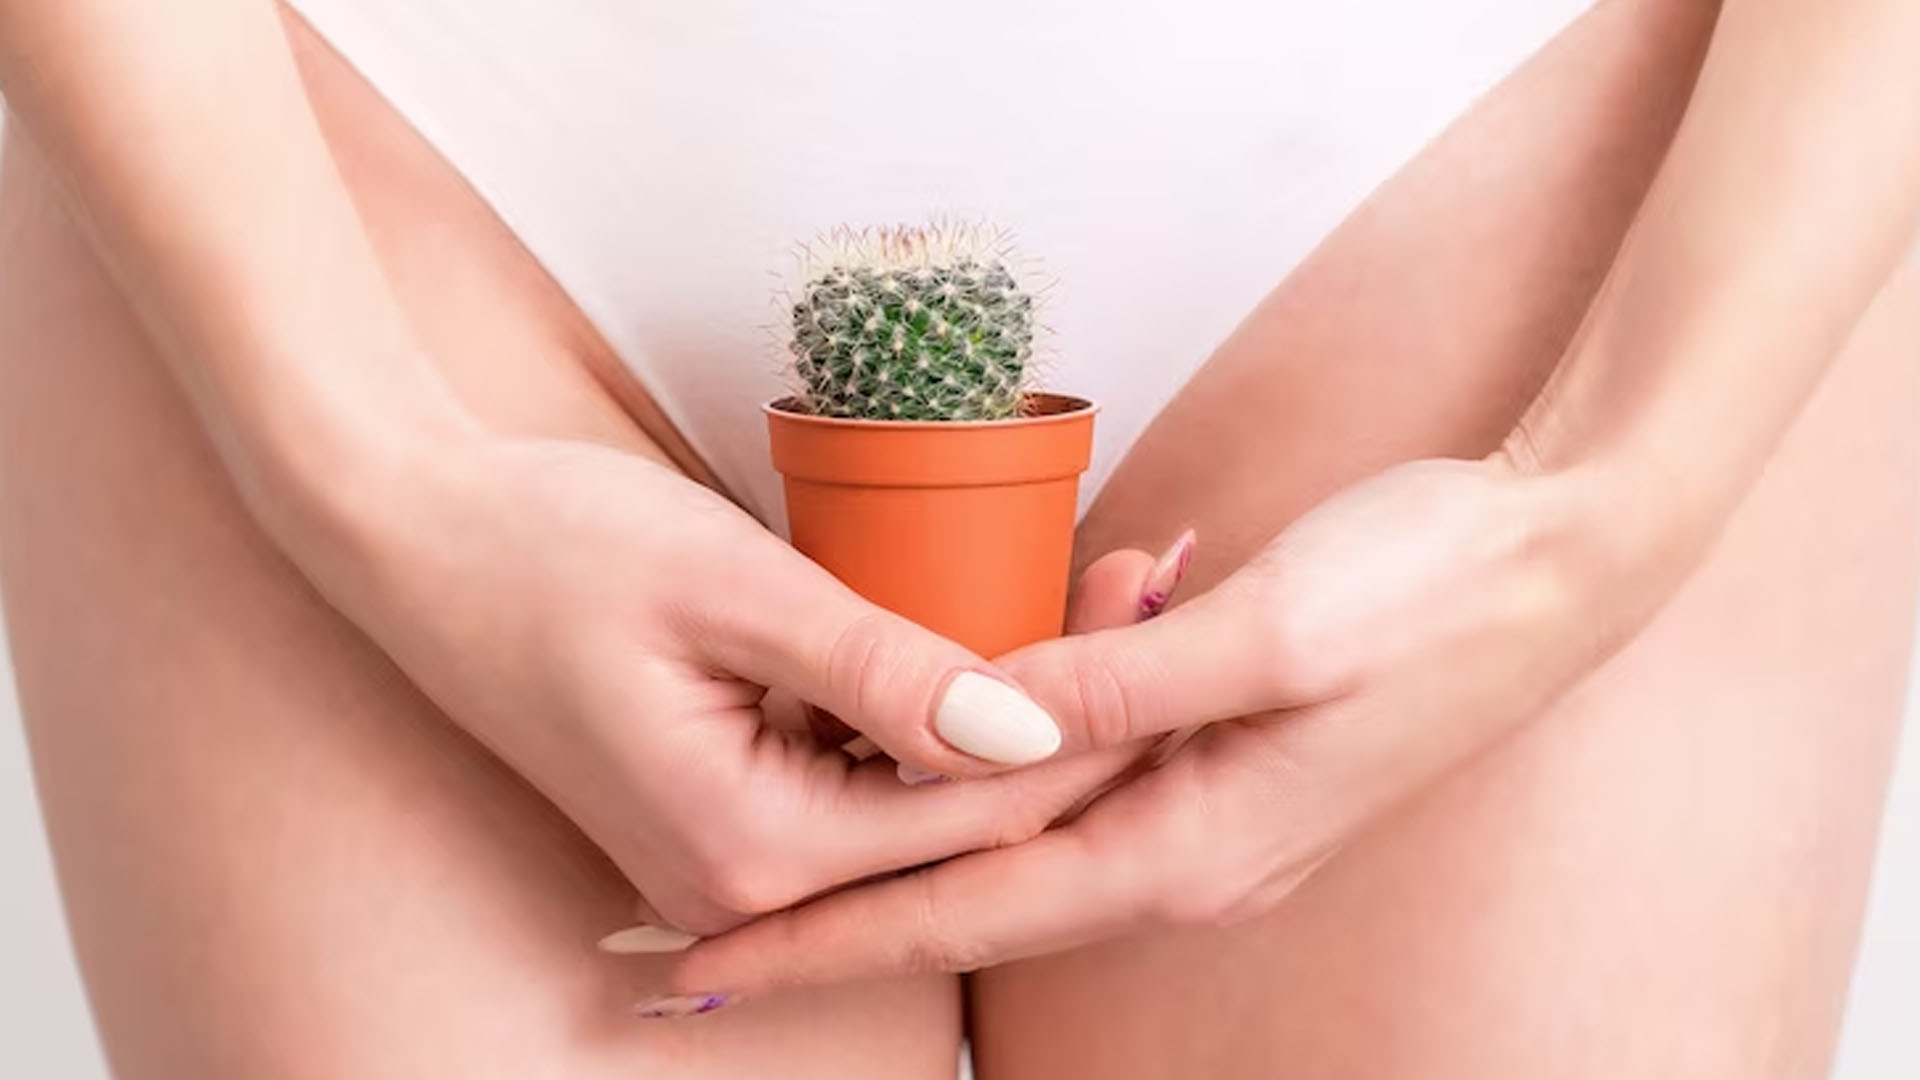 What are the Home Remedies for Vaginal Dryness?